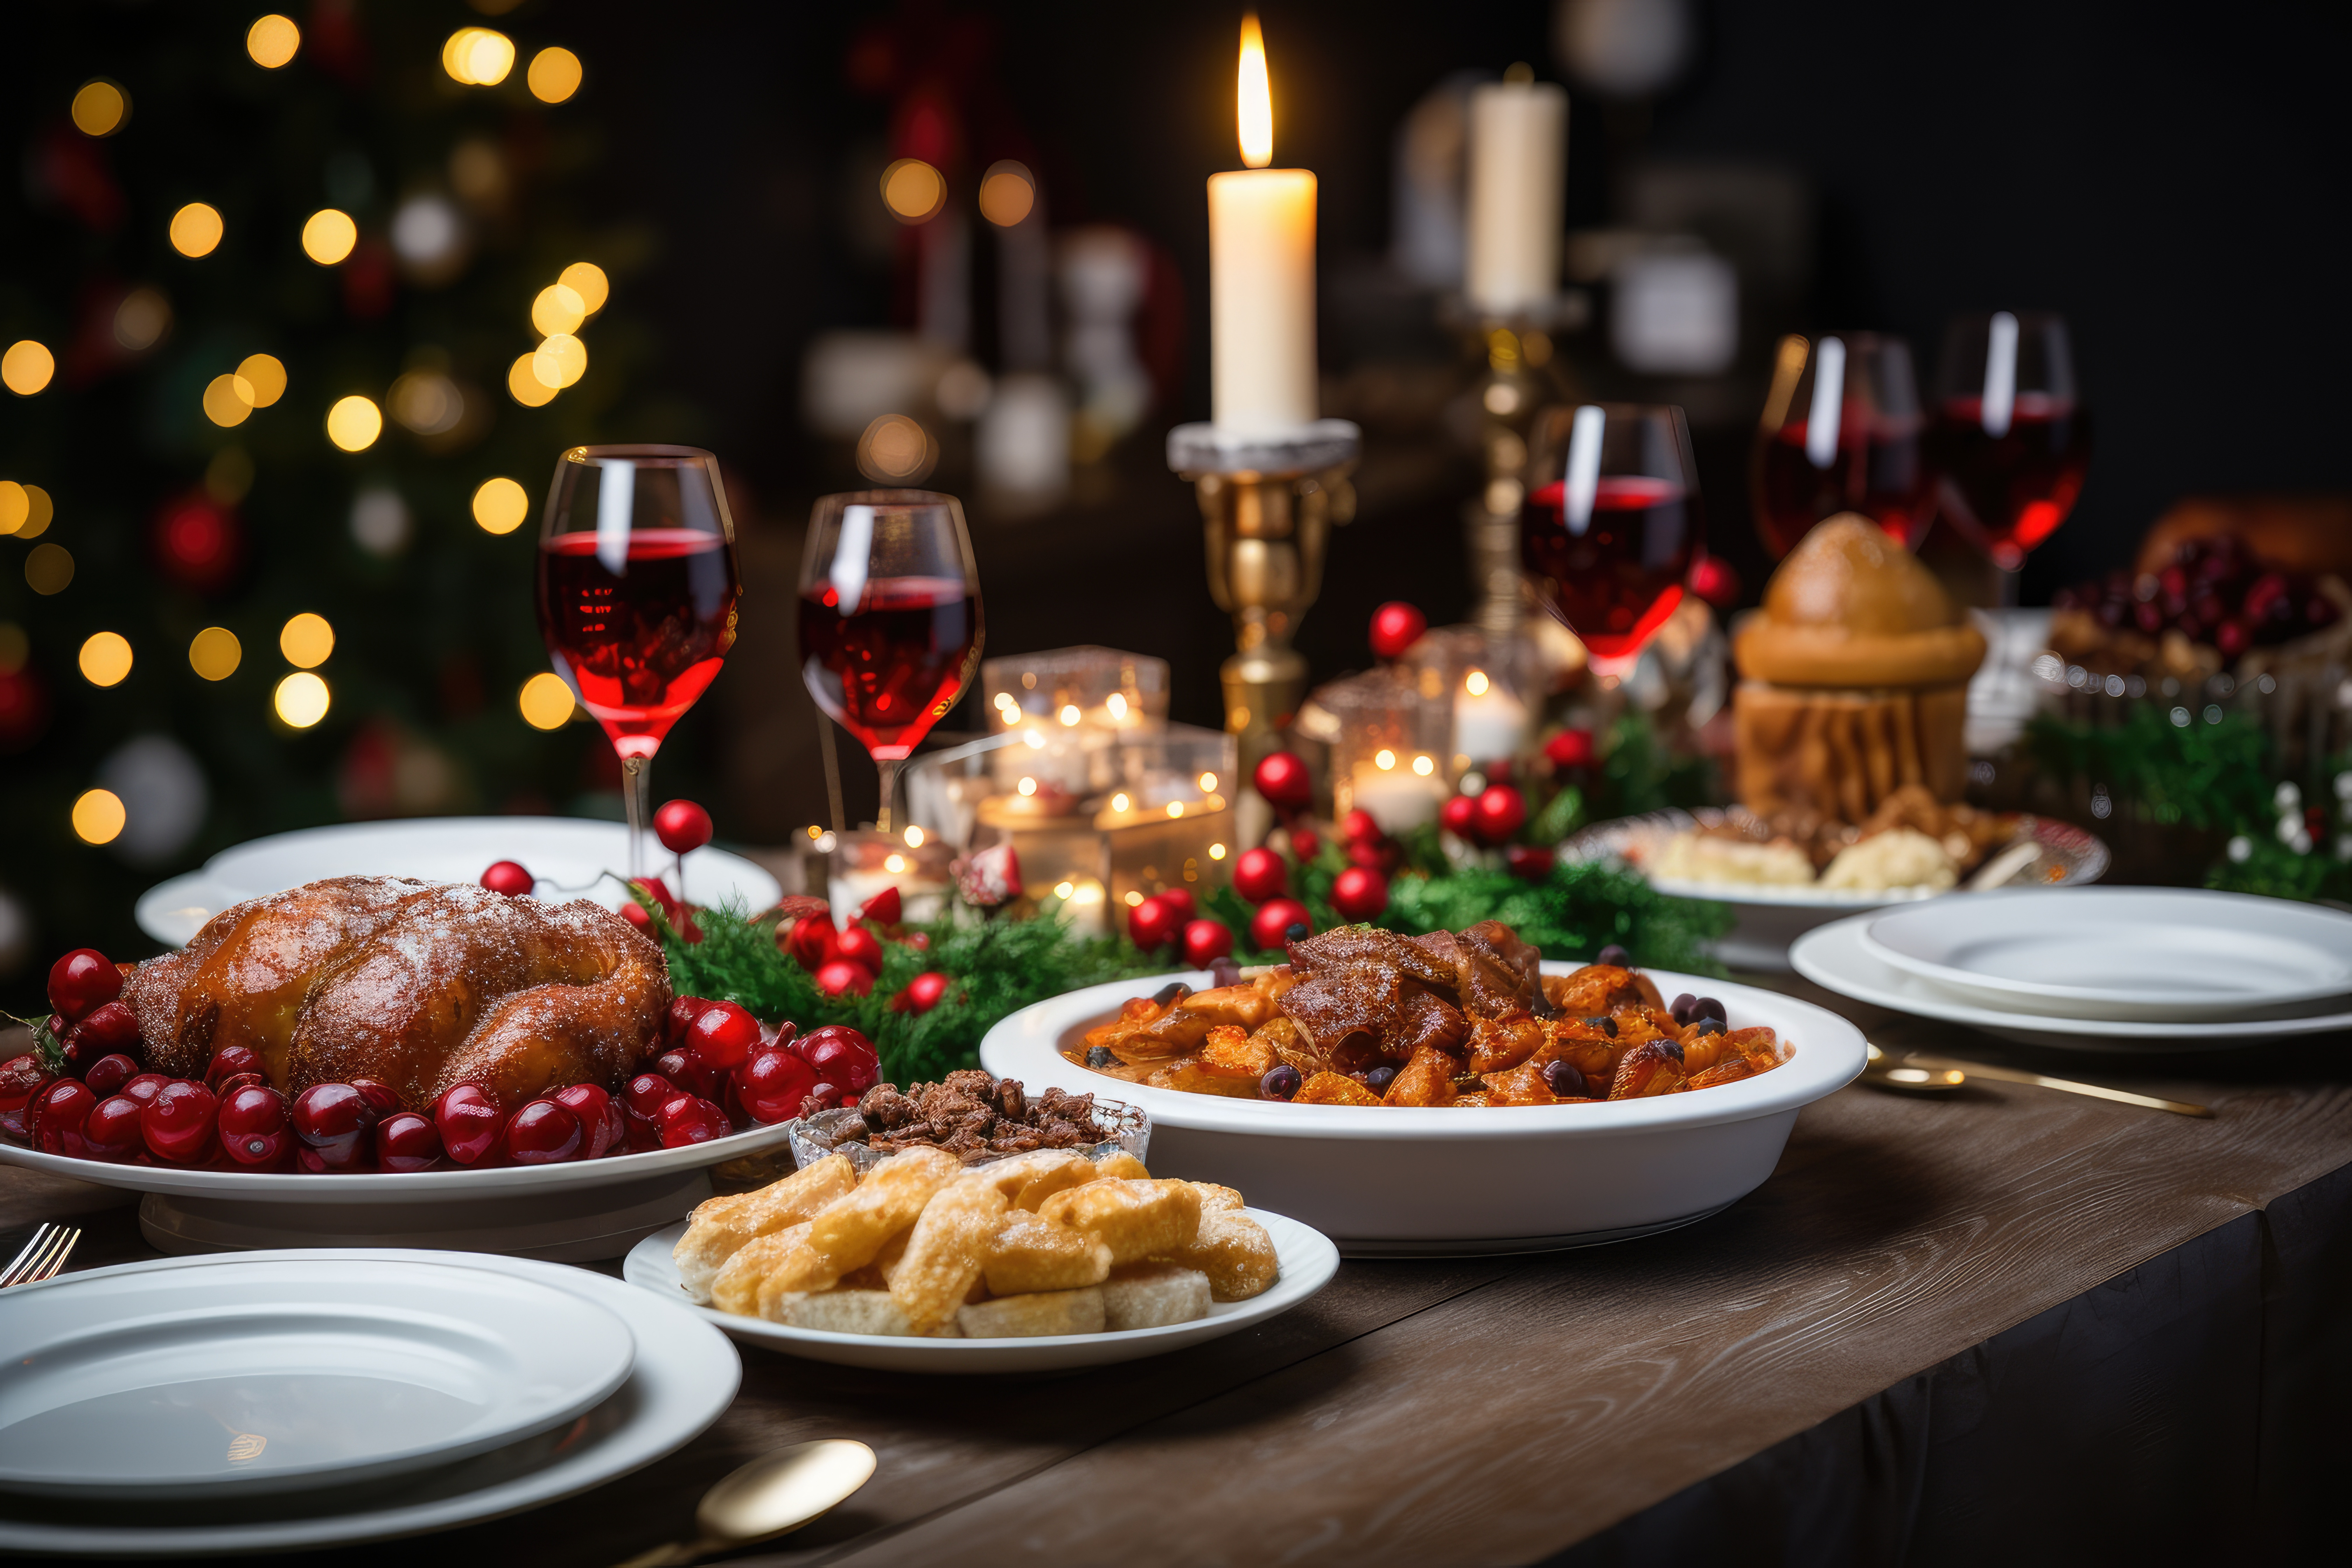 AI-generated image (by 123rf.com) of a holiday dining table with a variety of holiday decor, food, and lit candles on a large table. There is a blurred Christmas tree in the background.